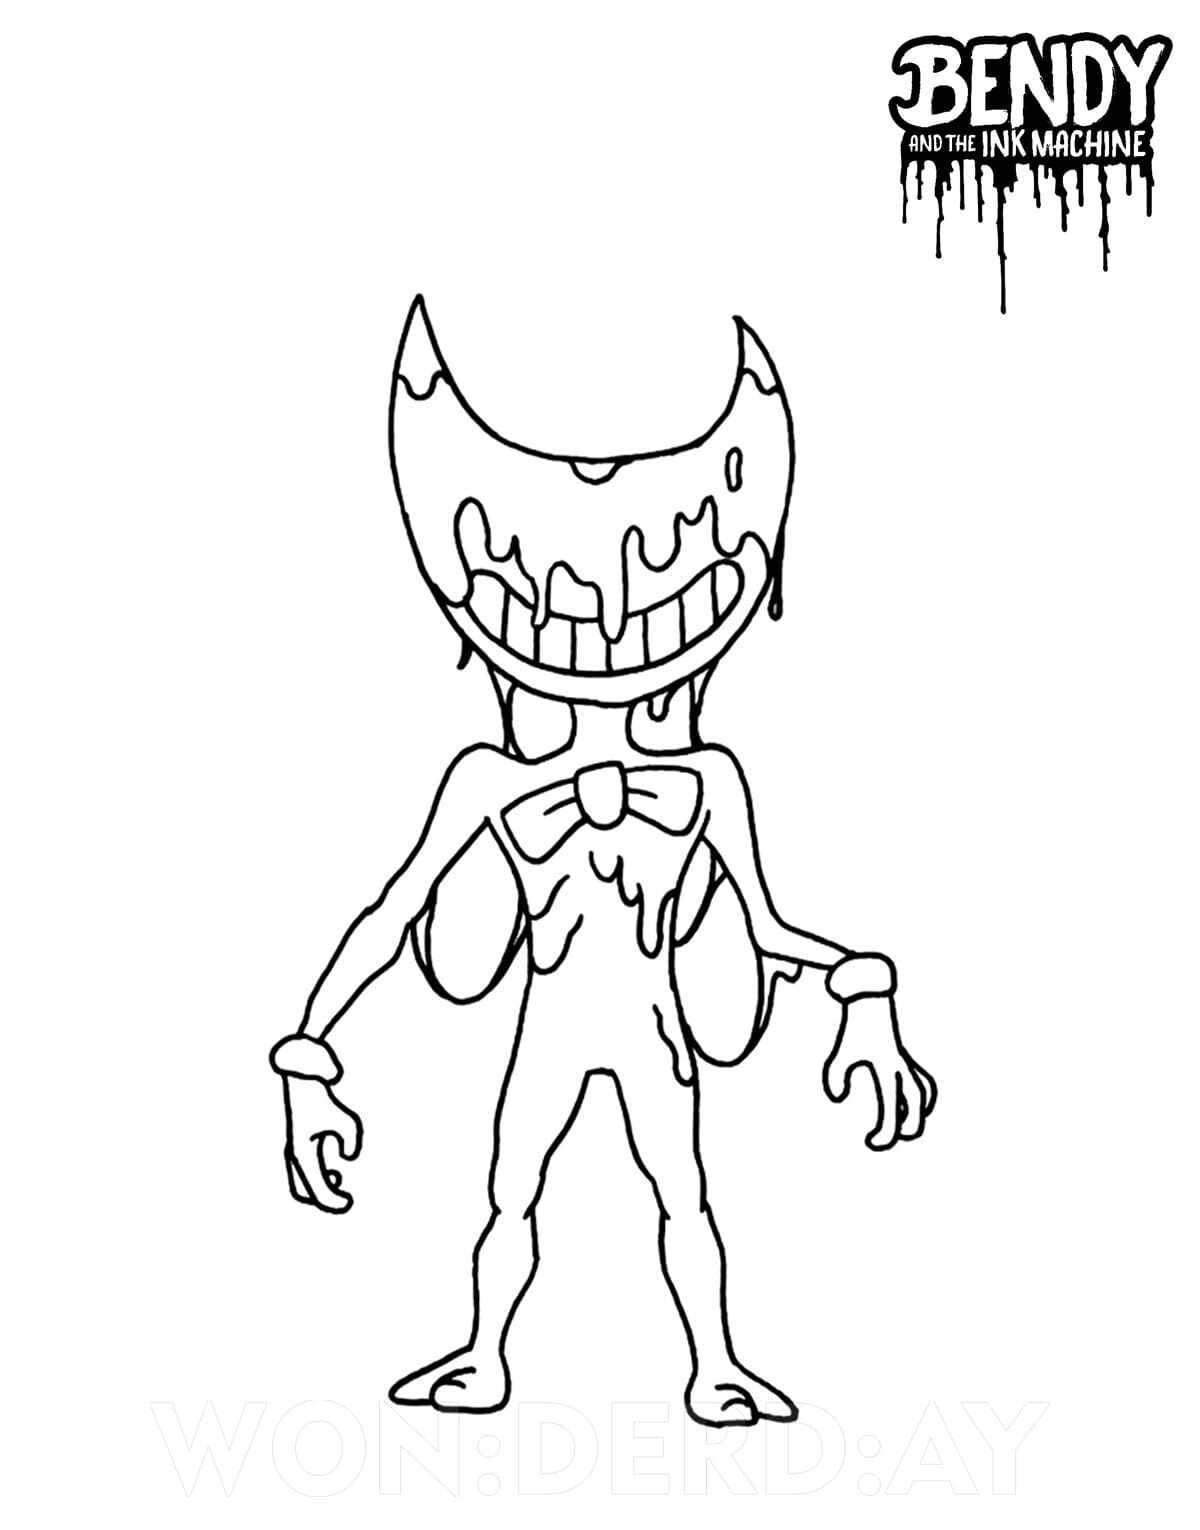 Bendy With The Ink Covered His Face Bring Bow Tie From Bendy And The Ink Machine Coloring Pages